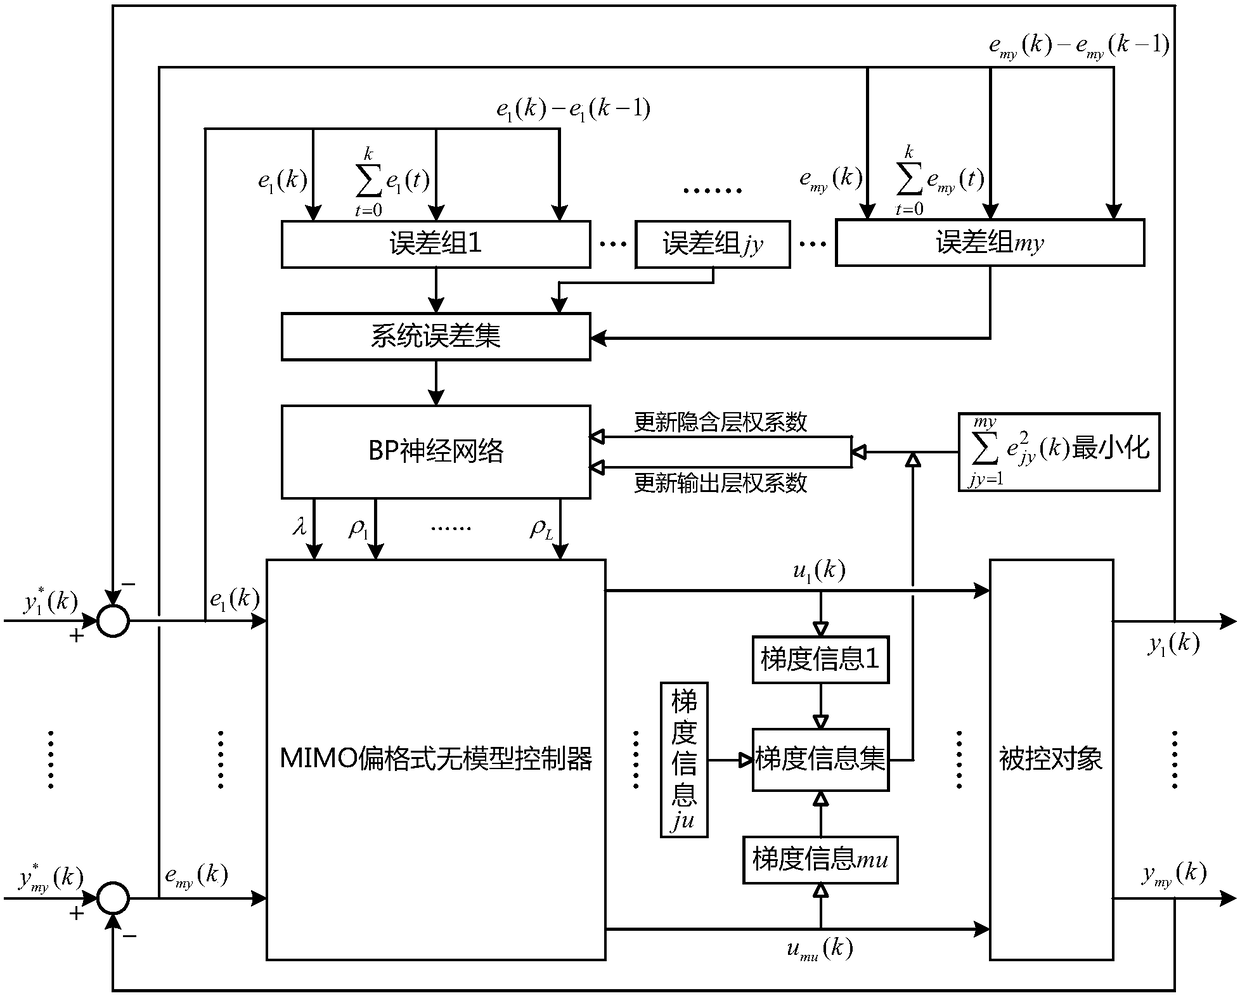 Parameter self-tuning method based on system error for MIMO partial format model-free controller